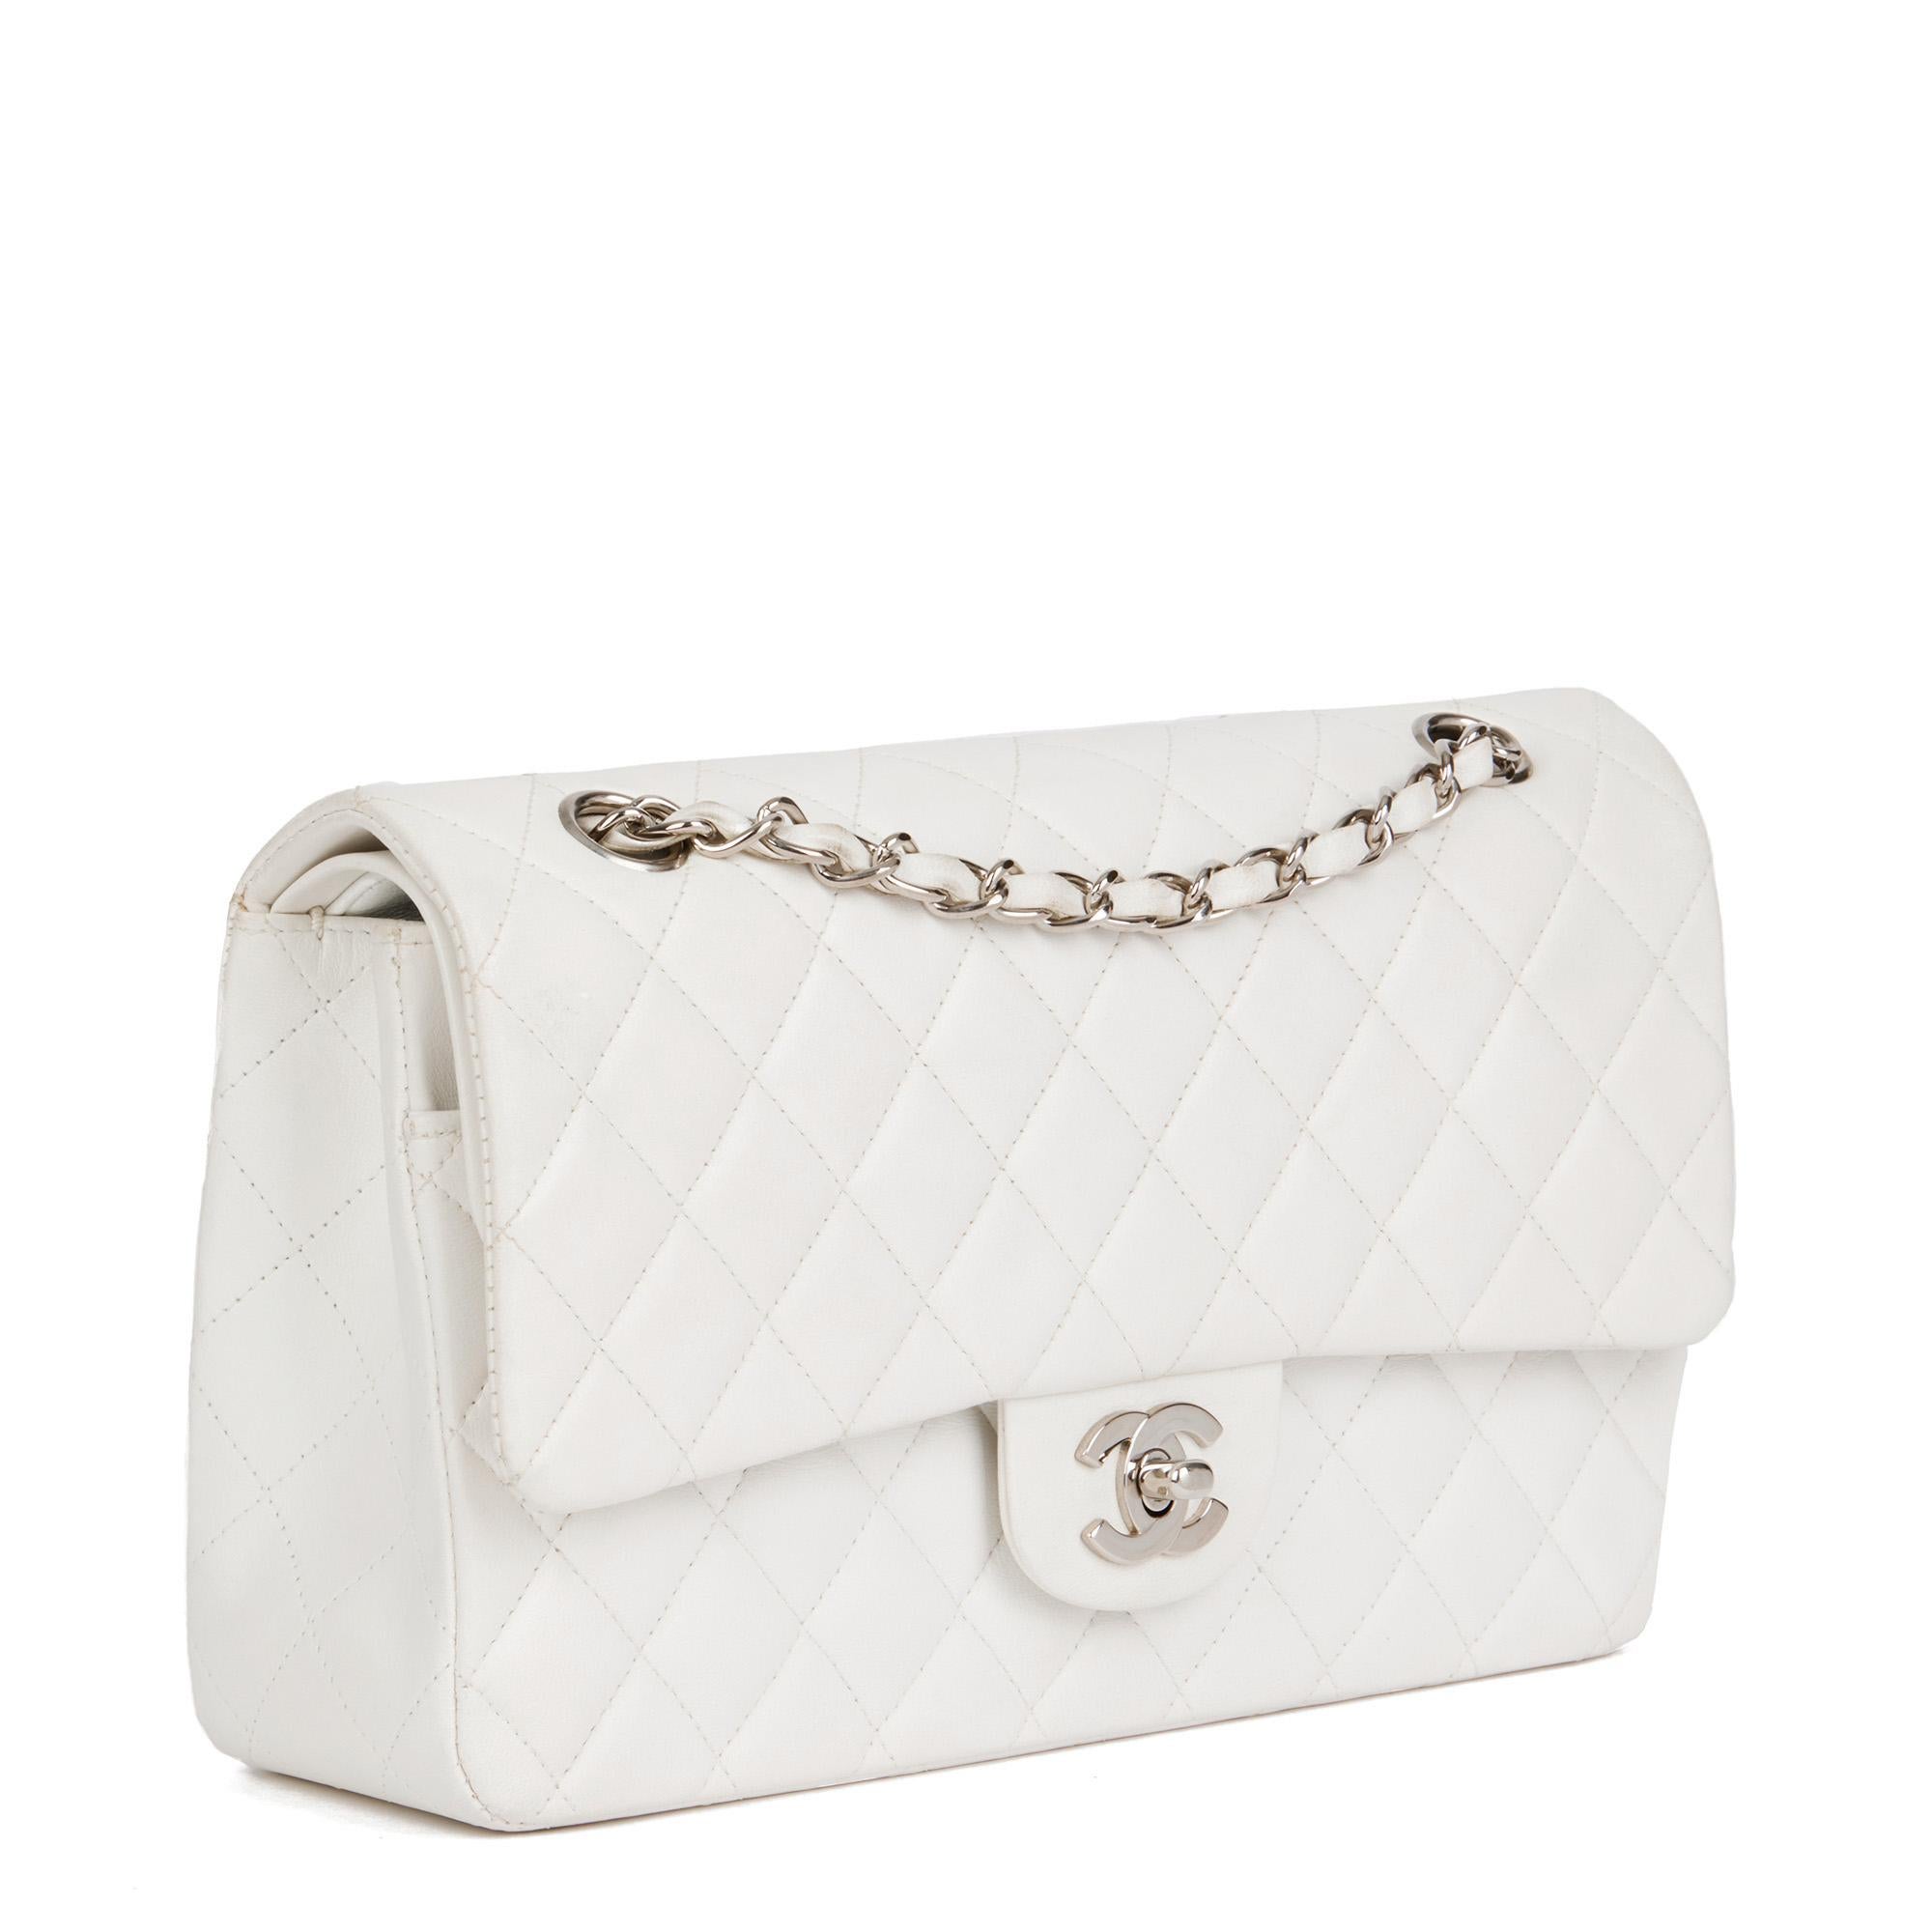 CHANEL
White Quilted Lambskin Vintage Medium Classic Double Flap Bag 

Xupes Reference: HB4728
Serial Number: 5882551
Age (Circa): 1999
Accompanied By: Authenticity Card
Authenticity Details: Authenticity Card, Serial Sticker (Made in